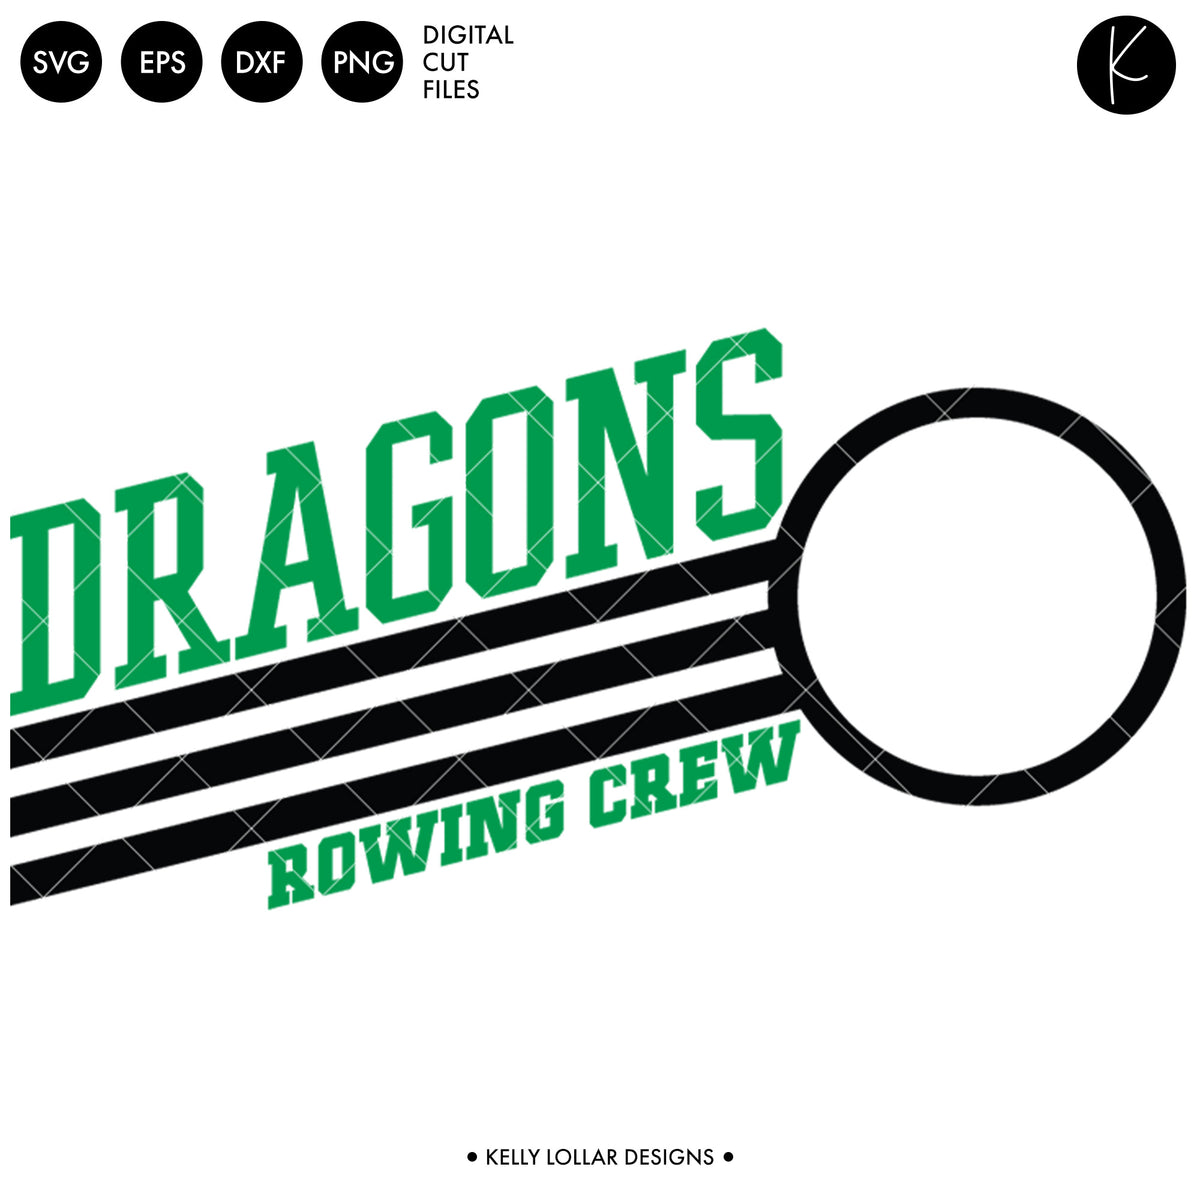 Dragons Rowing Crew Bundle | SVG DXF EPS PNG Cut Files